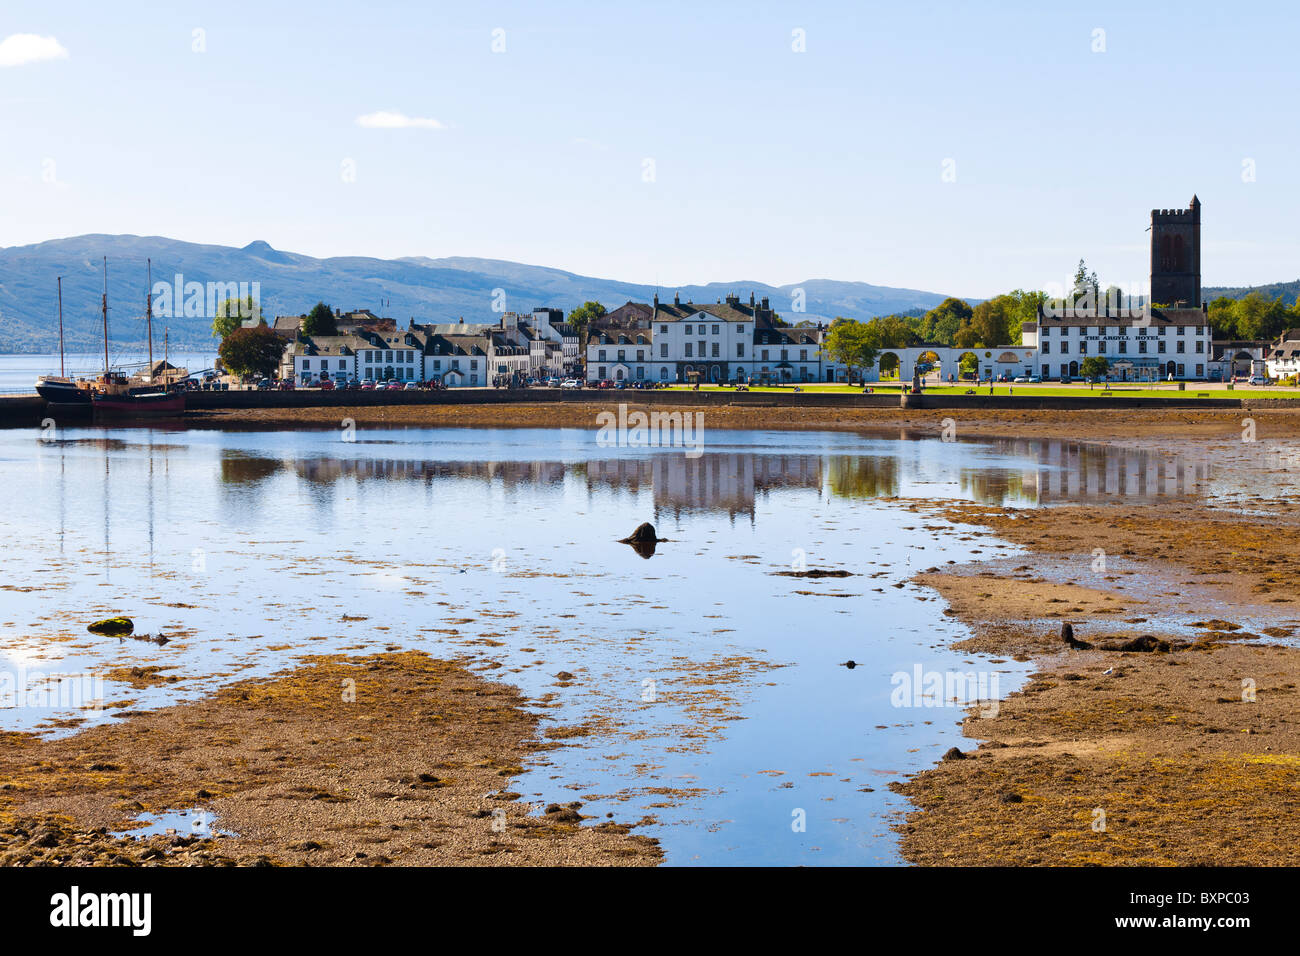 The town of Inveraray at the head of Loch Fyne, Argyll & Bute, Scotland UK Stock Photo